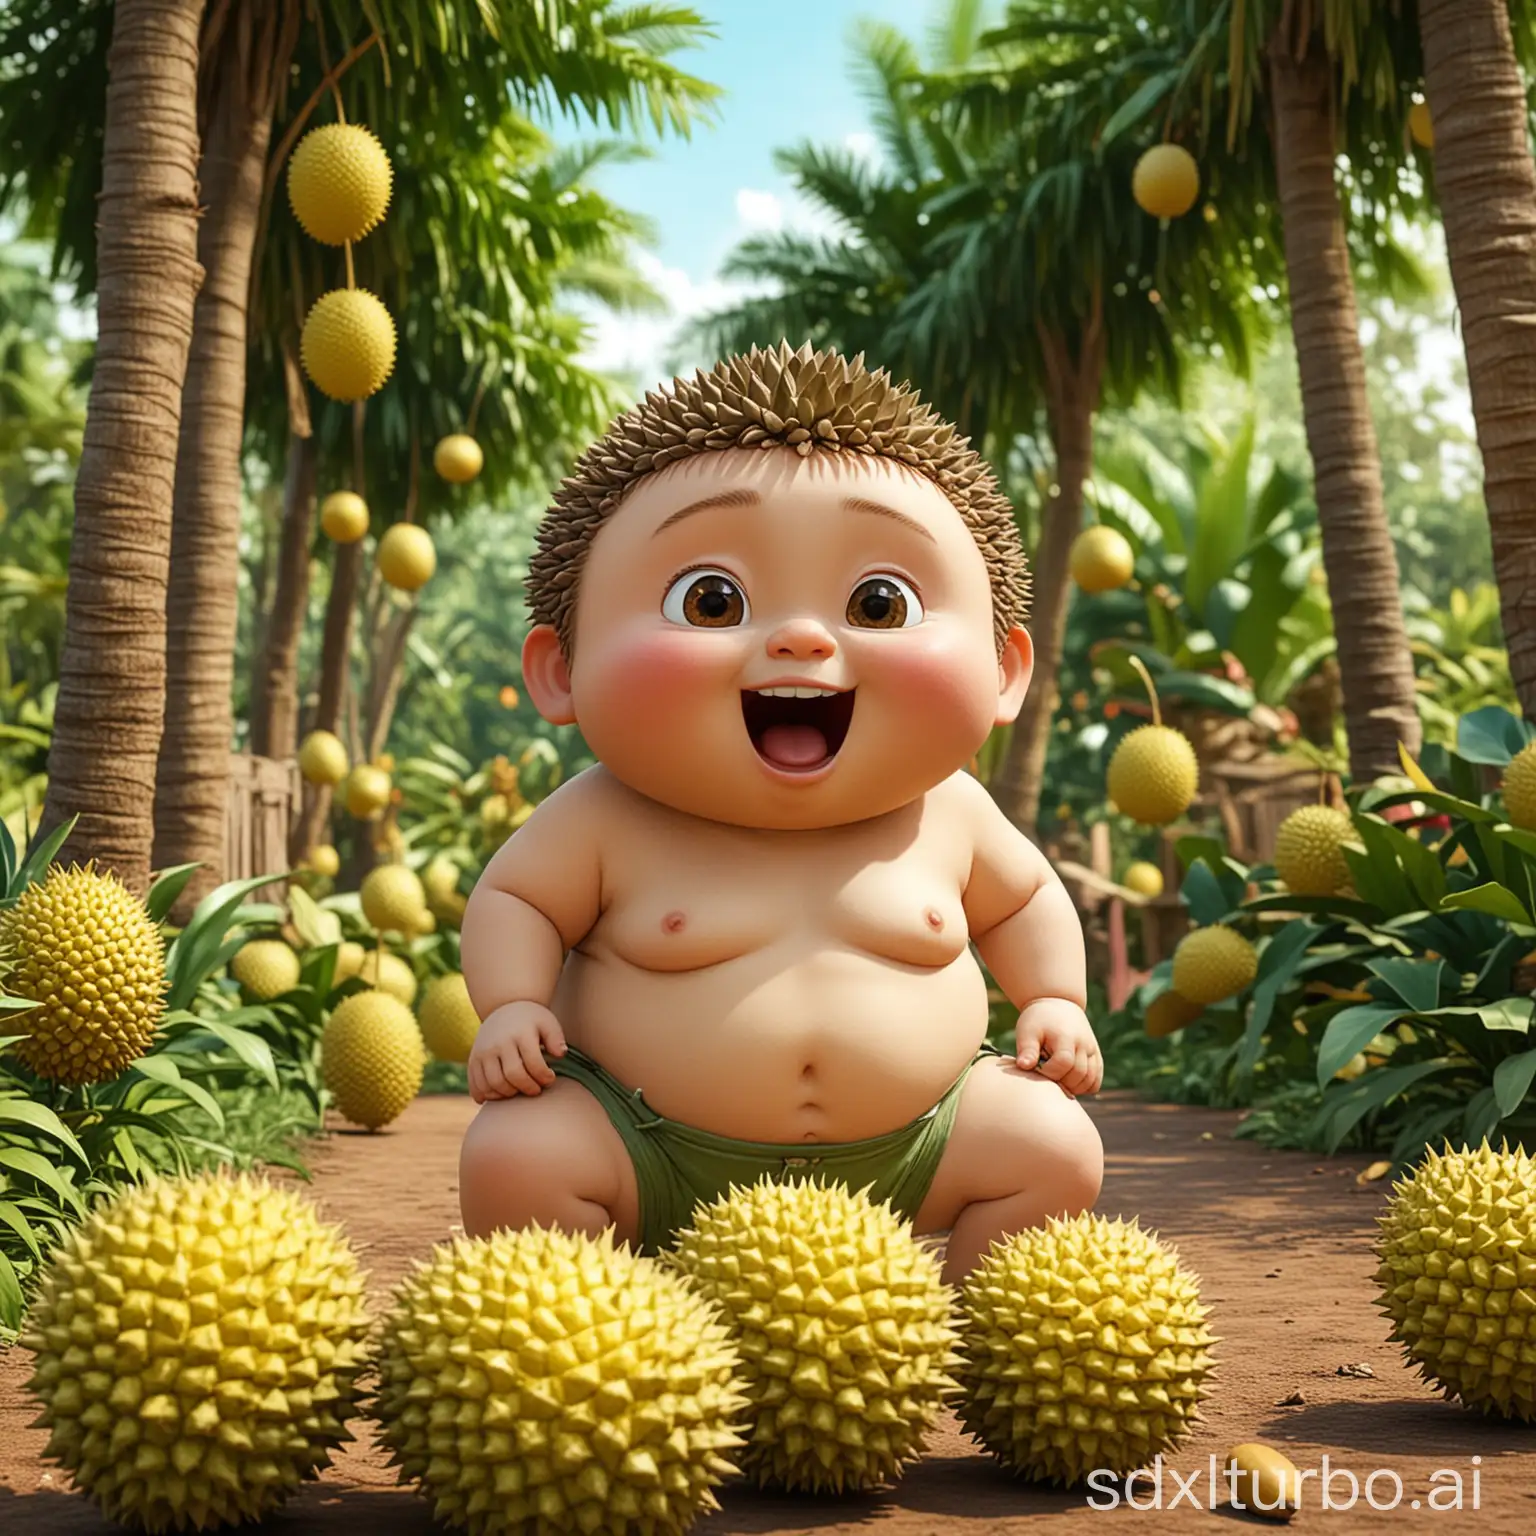 There is a 3D cute chubby little boy playing happily in the durian garden